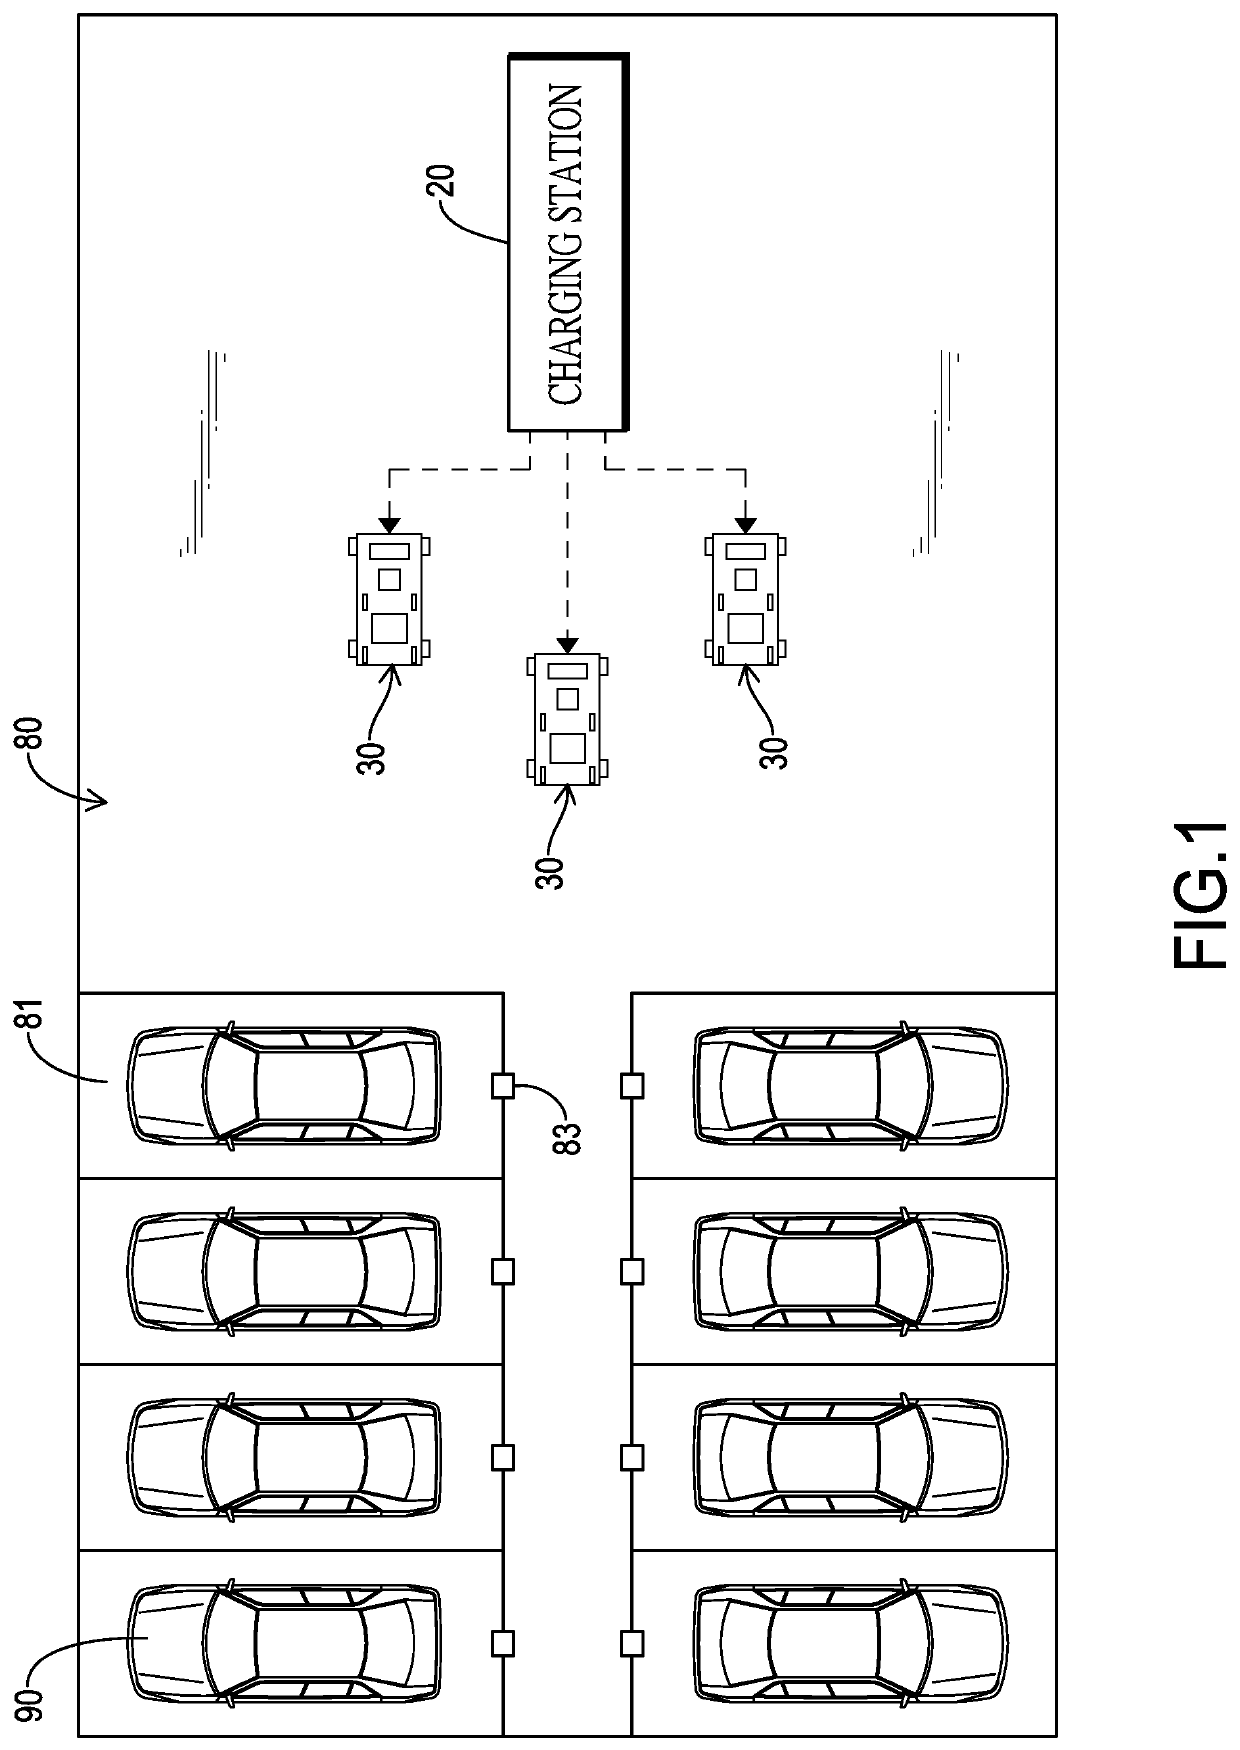 Electric vehicle charging system